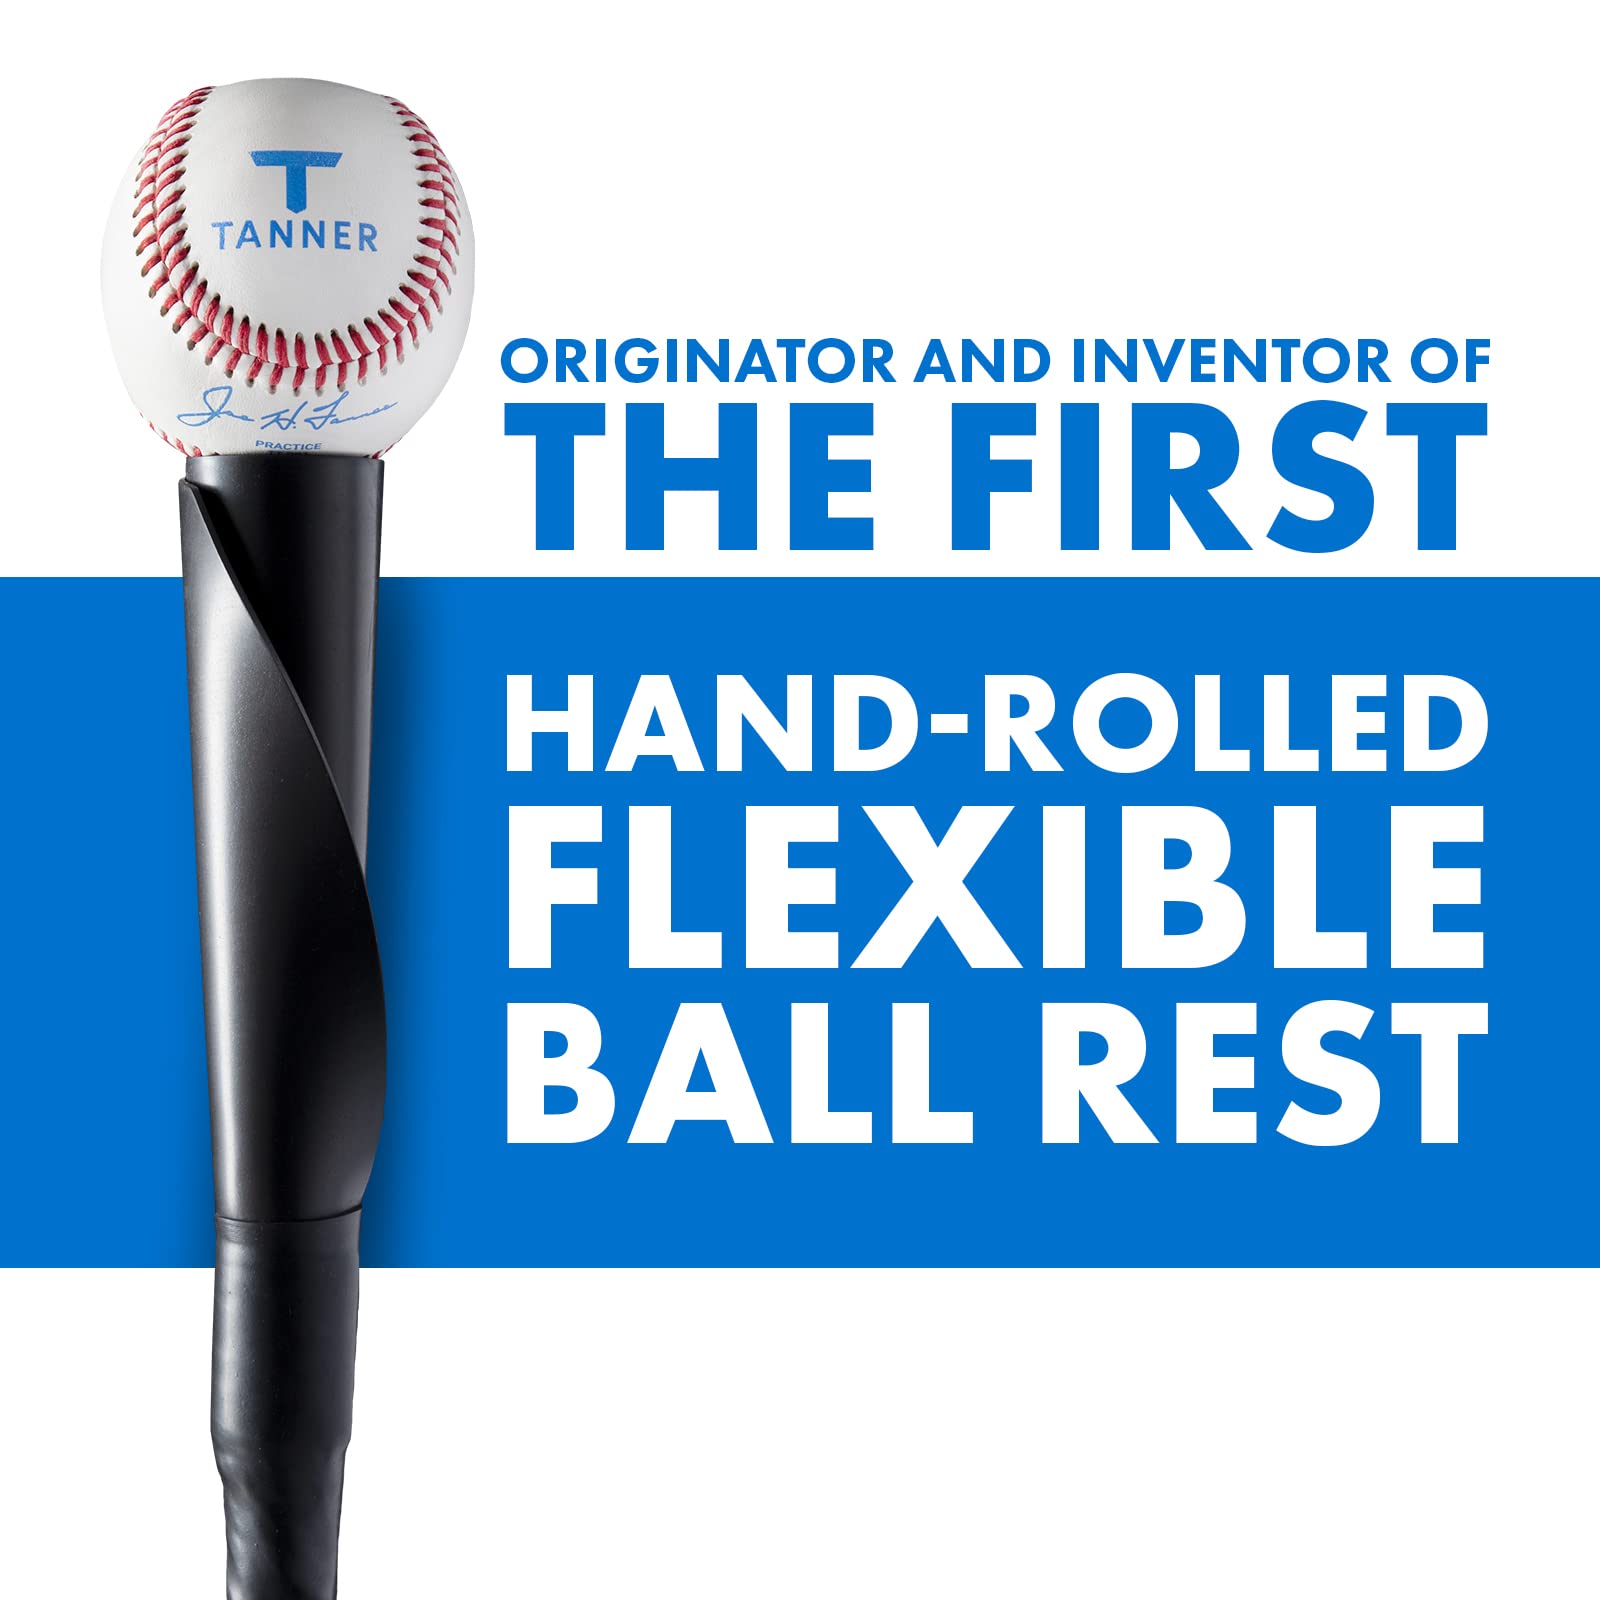 Tanner TEE The Original Premium Pro-Style Baseball/Softball Batting Tee with Tanner Original Base, Patented Hand-Rolled Flextop, Adjustable Height: 26 to 43 inches